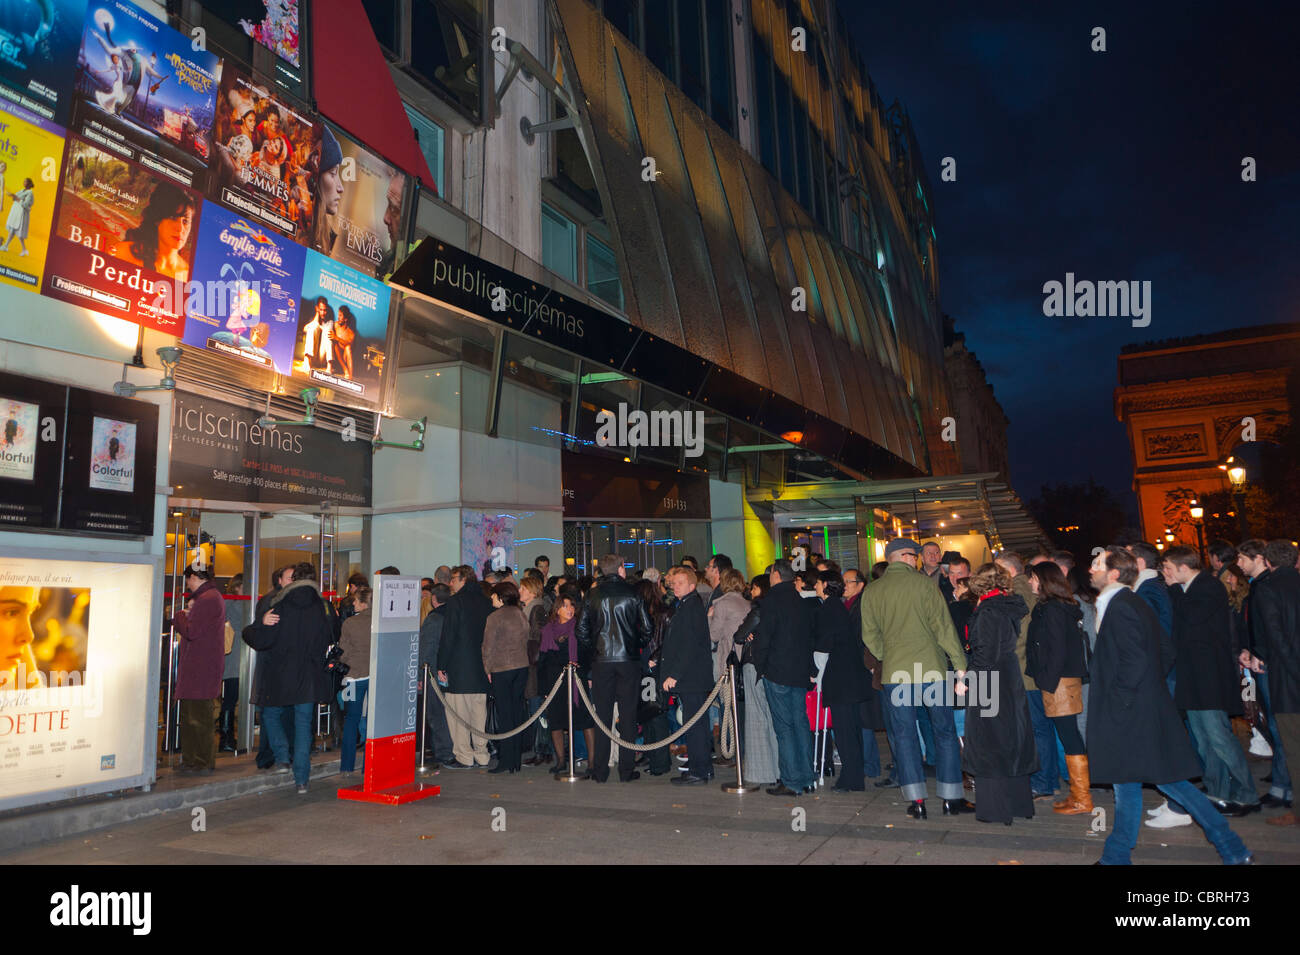 Paris Champs ELysees, France, People Queuing, Standing on Line, in front of French Cinema Movie Theatre, at Night  'Drugstore Publicis', waiting lining up outside cinema Stock Photo